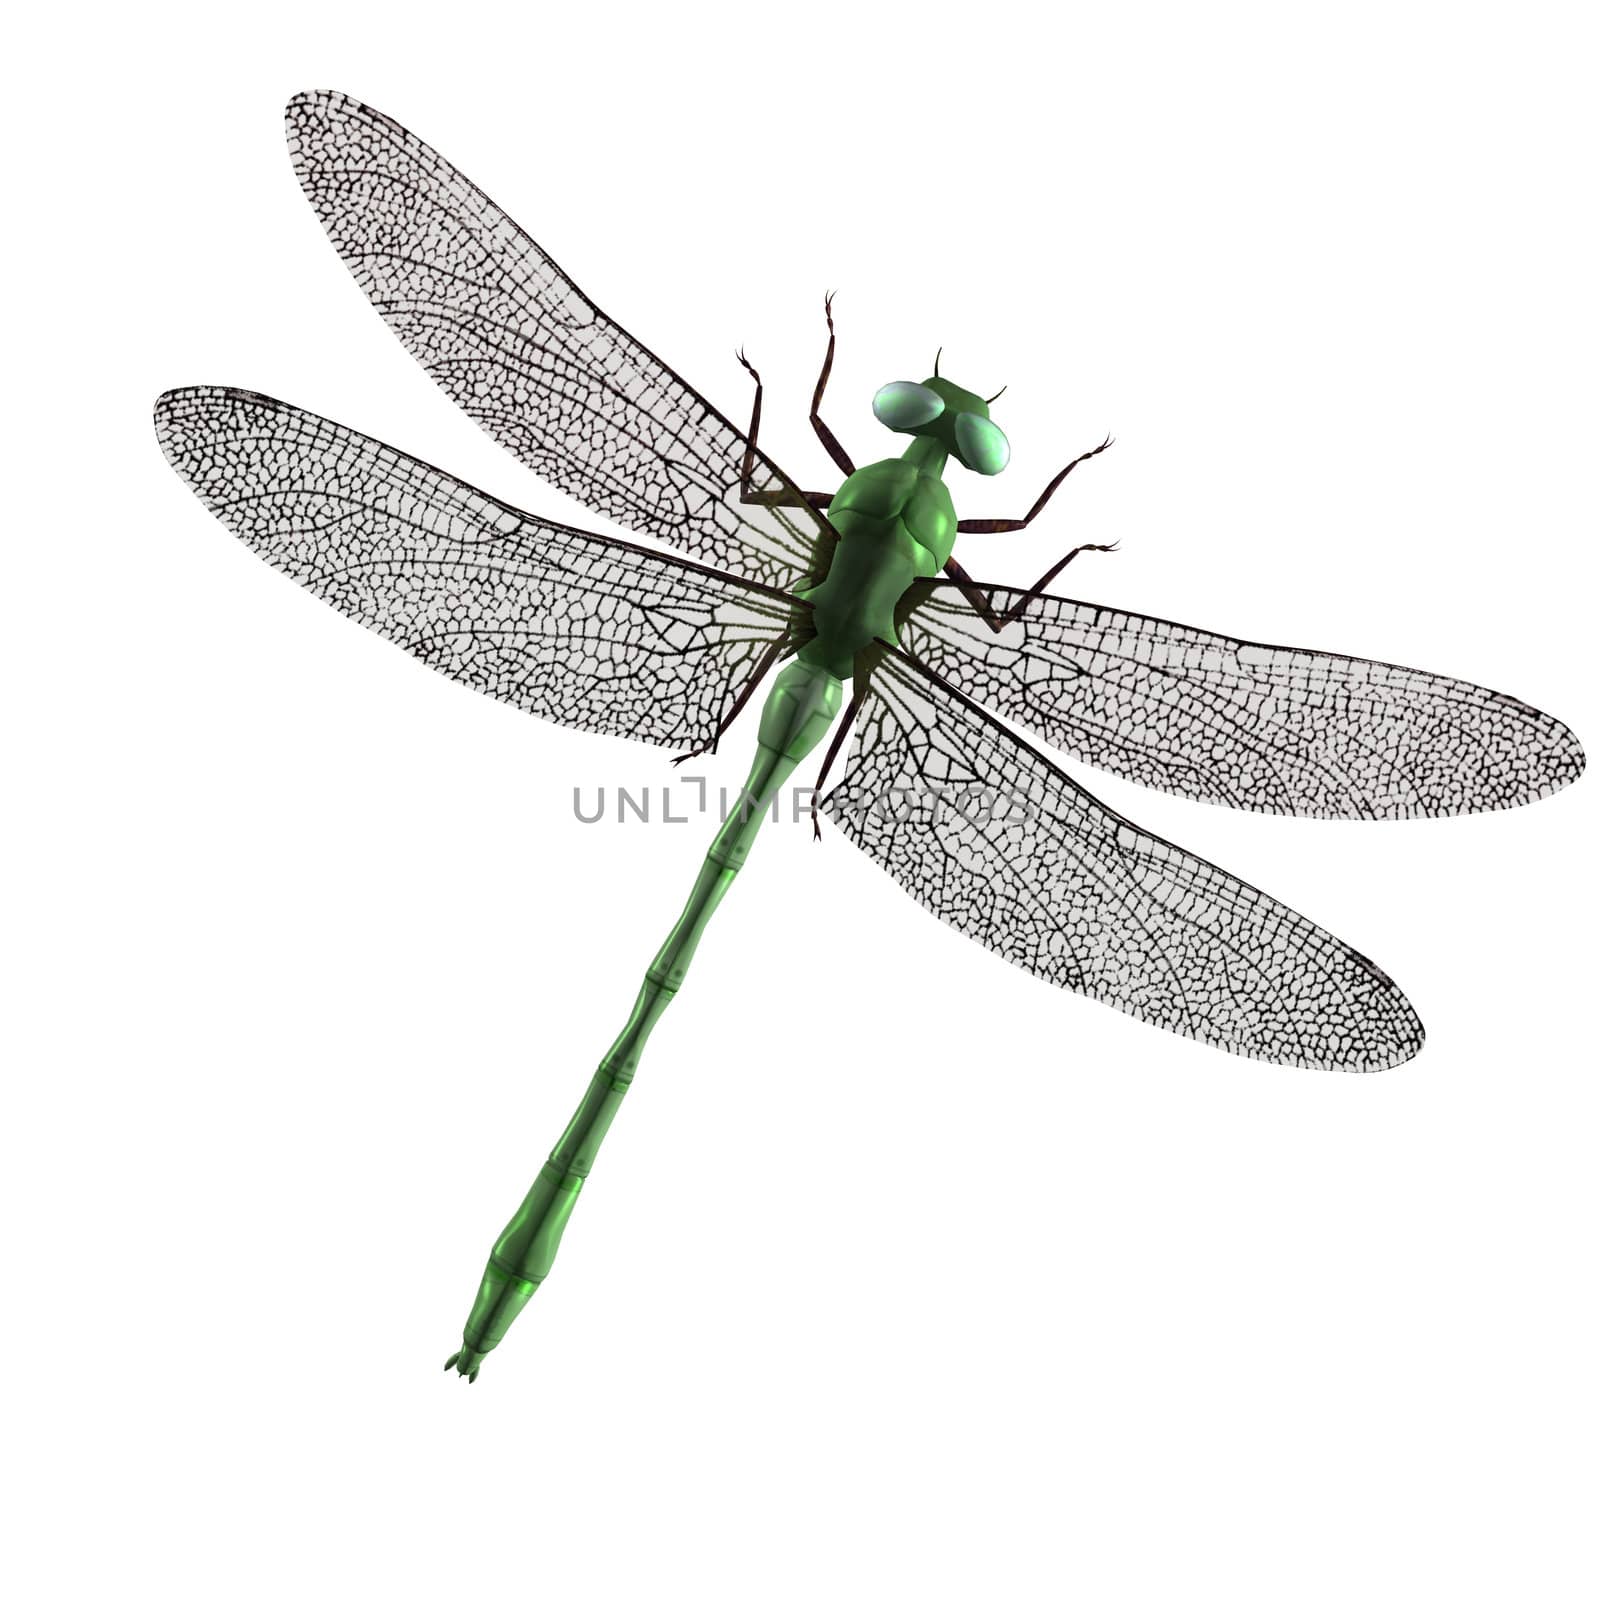 Green Dragonfly by kathygold